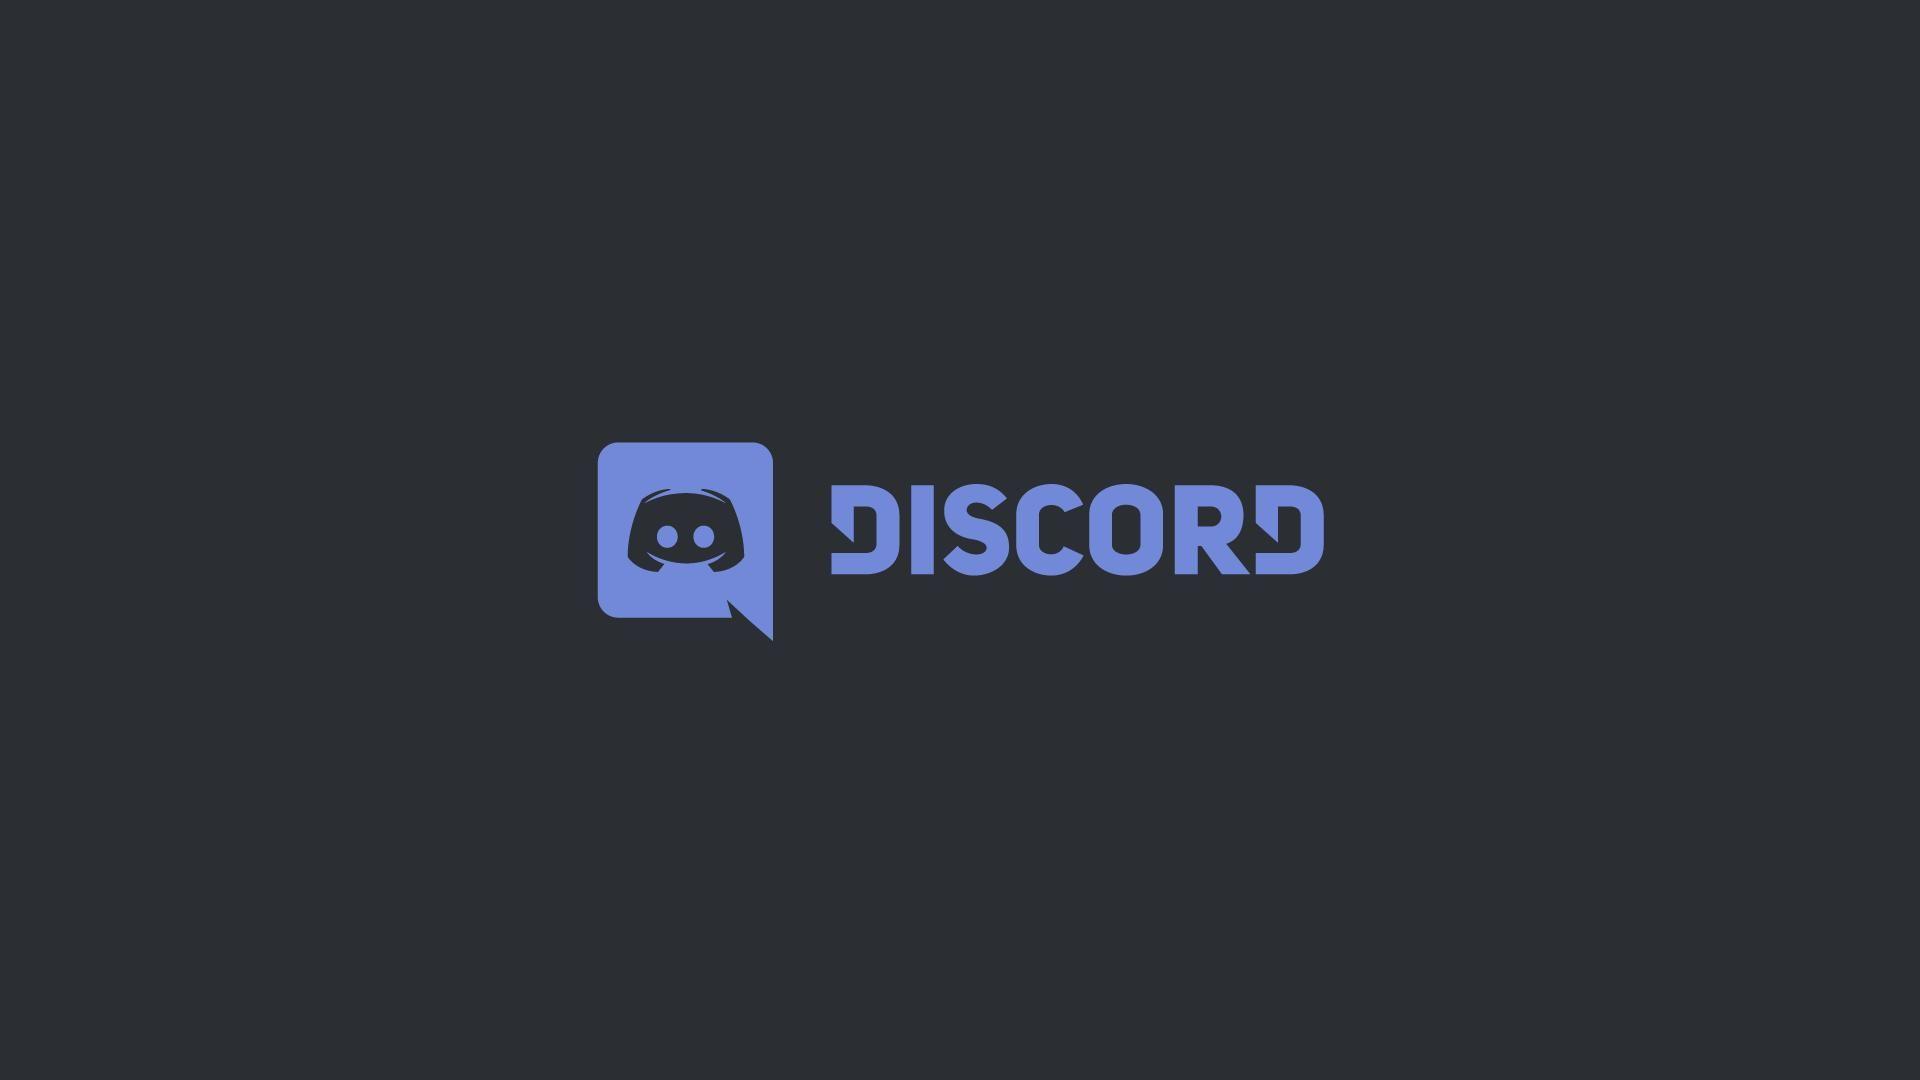 I made some Discord wallpaper for you! Leave requests for more